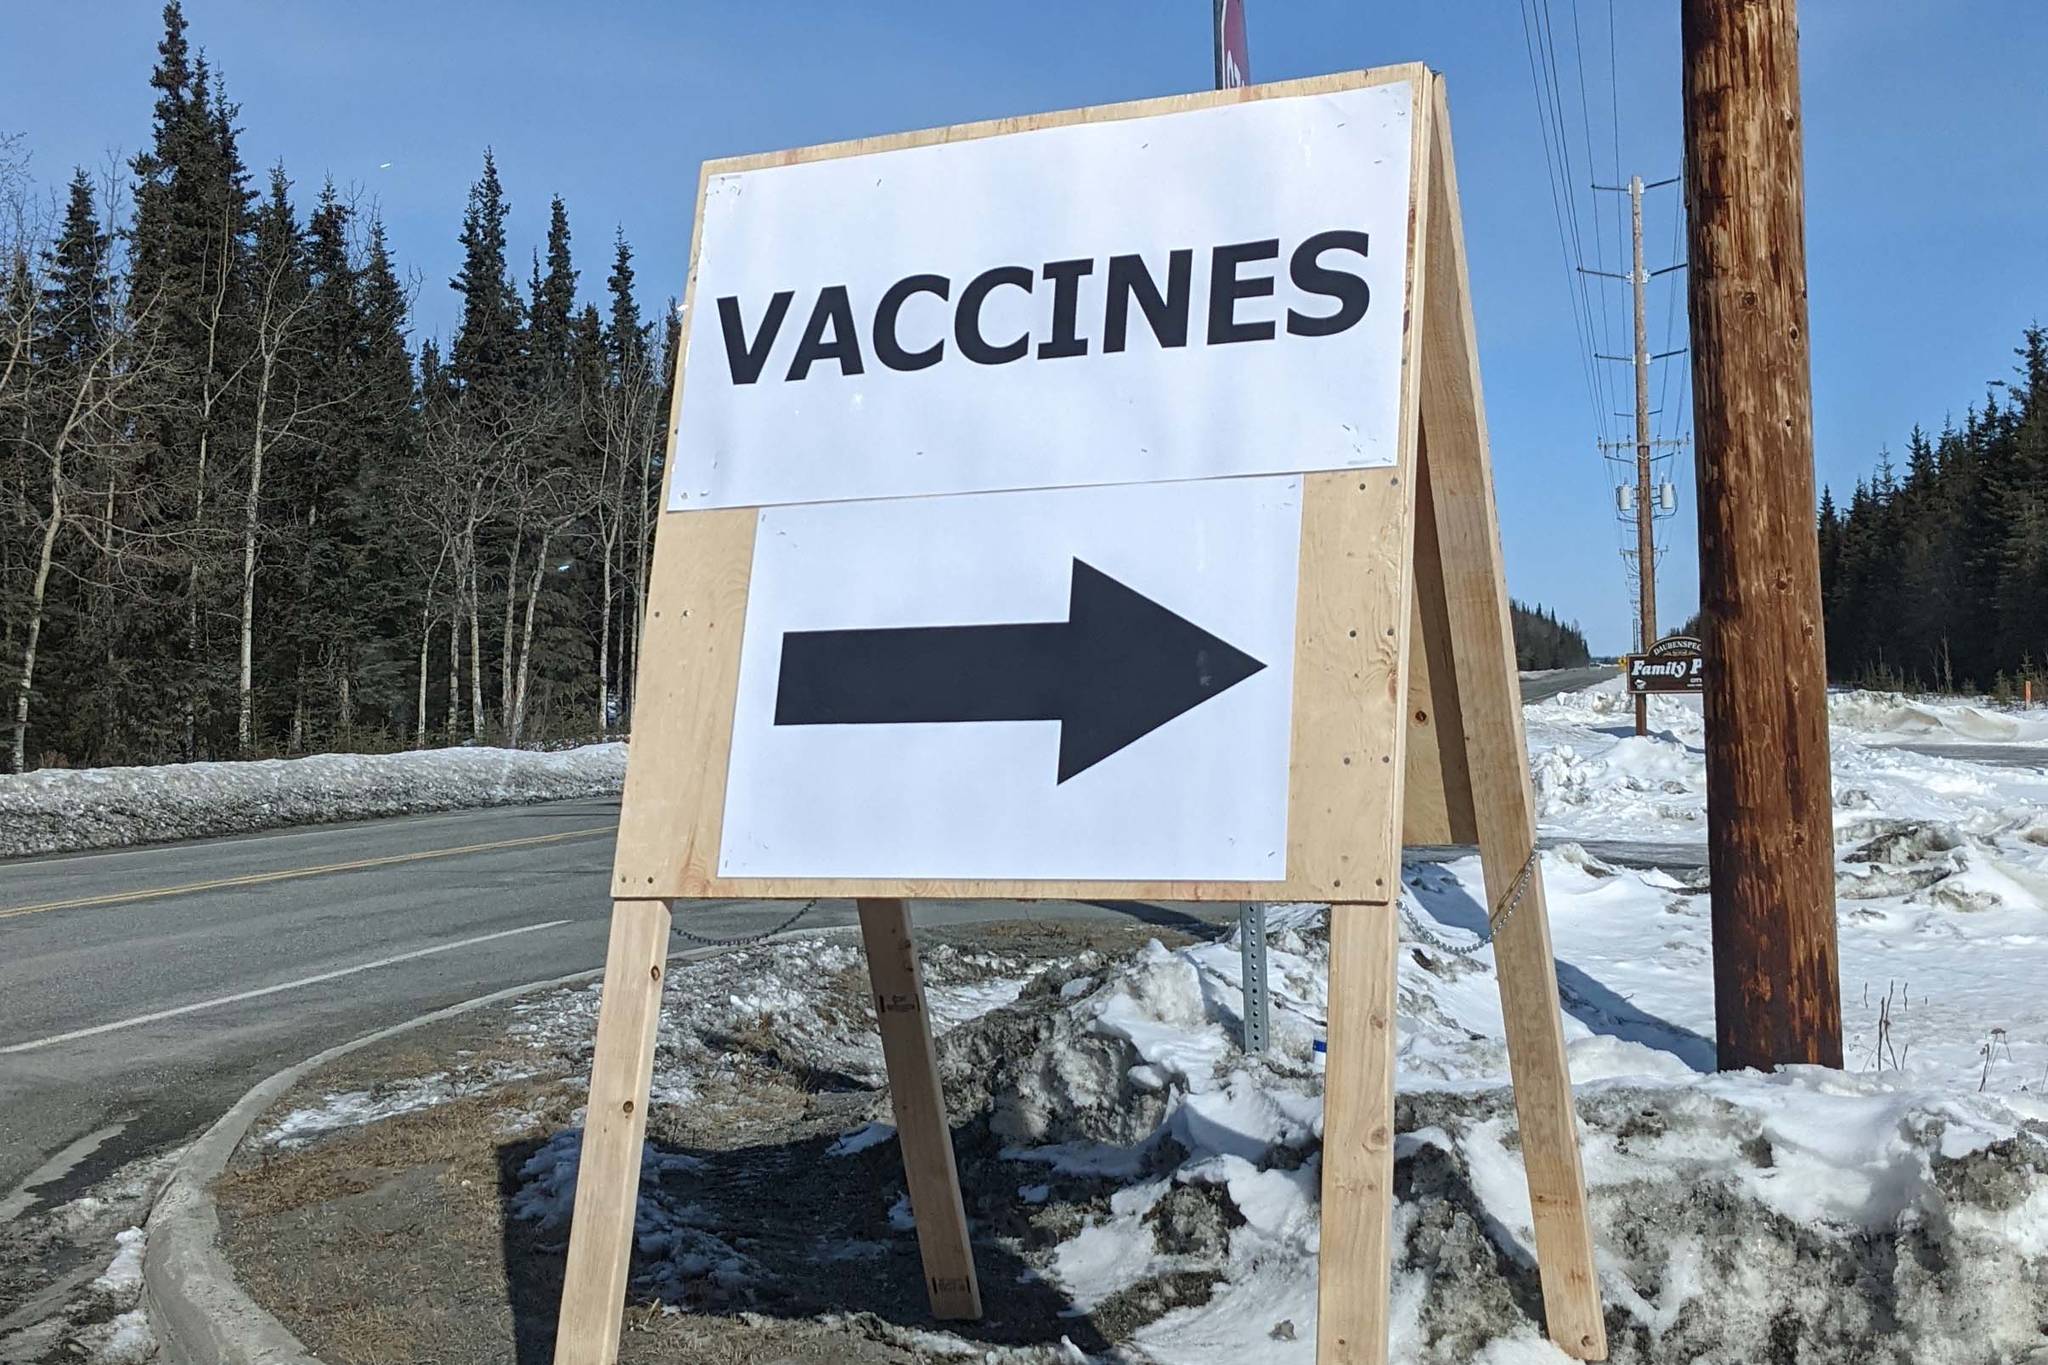 Peninsula Clarion file
A sign directs drivers to a vaccine clinic held at Beacon Occupational Health in Kenai on April 10.
A sign directs drivers to a vaccine clinic held at Beacon Occupational Health in Kenai, Alaska, on Saturday, April 10, 2021. (Photo by Erin Thompson/Peninsula Clarion)